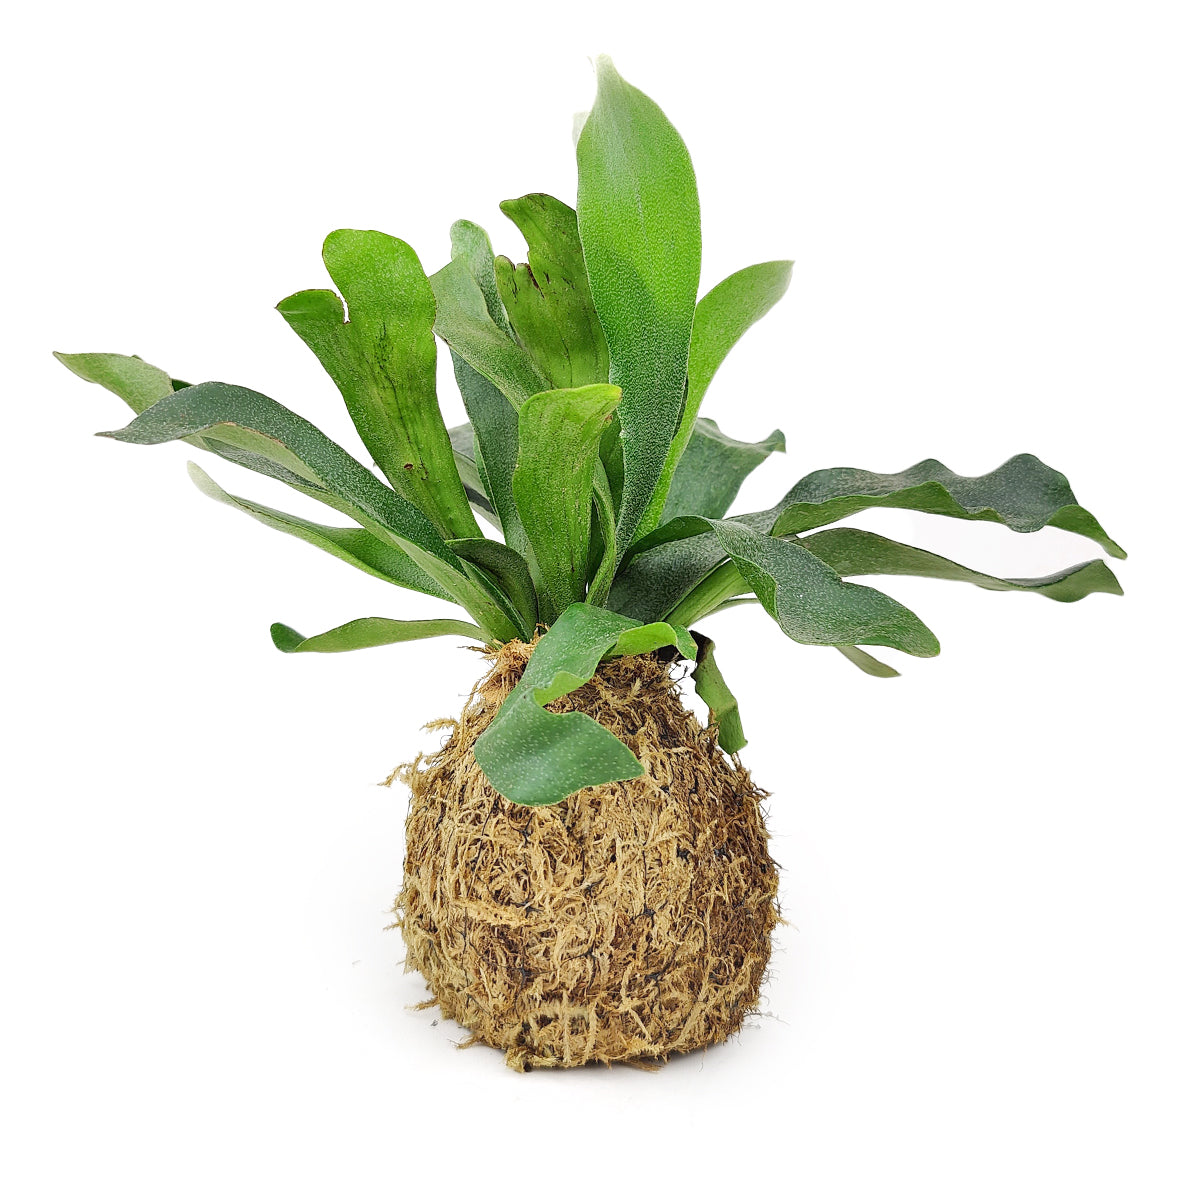 Japanese Moss Ball Planter, Buy 4 inch Kokedama online, Plants as gifts